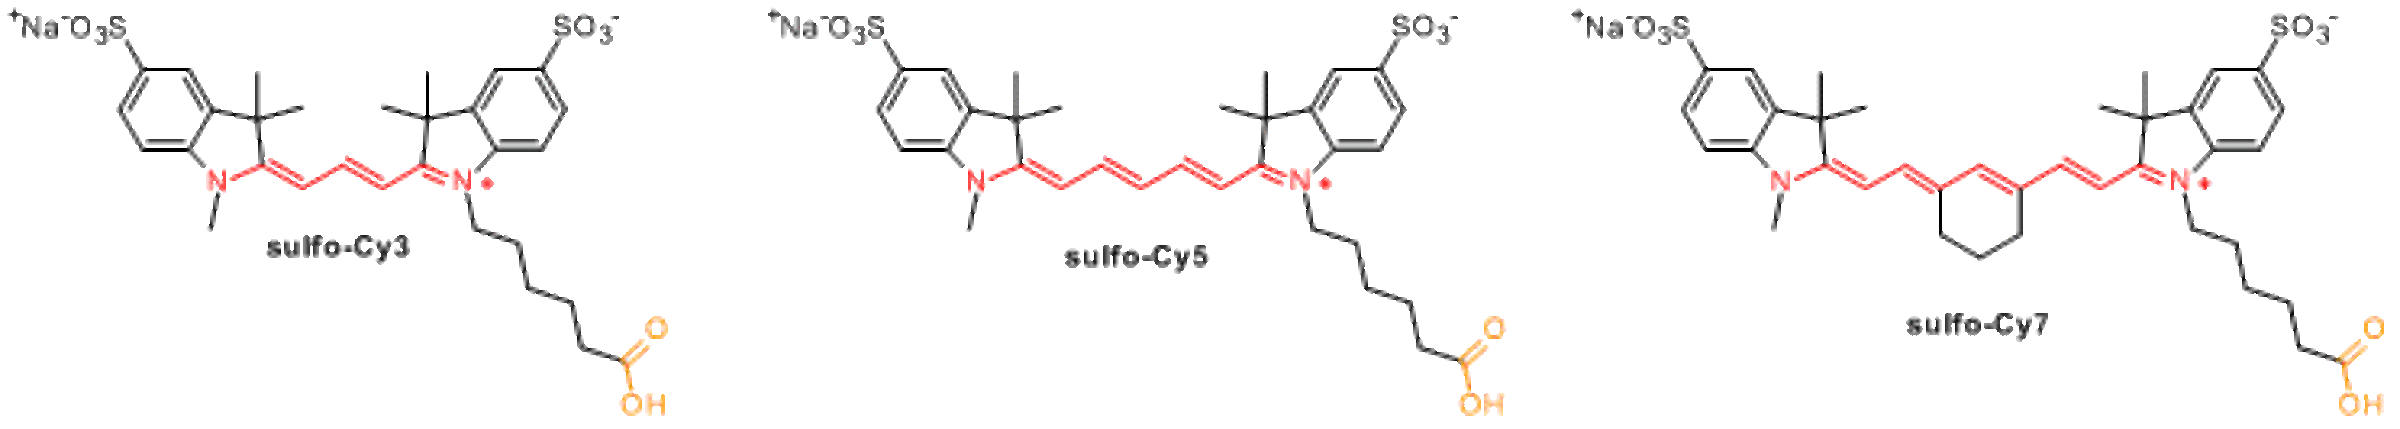 Structures of sulfonated cyanine dyes from Lumiprobe